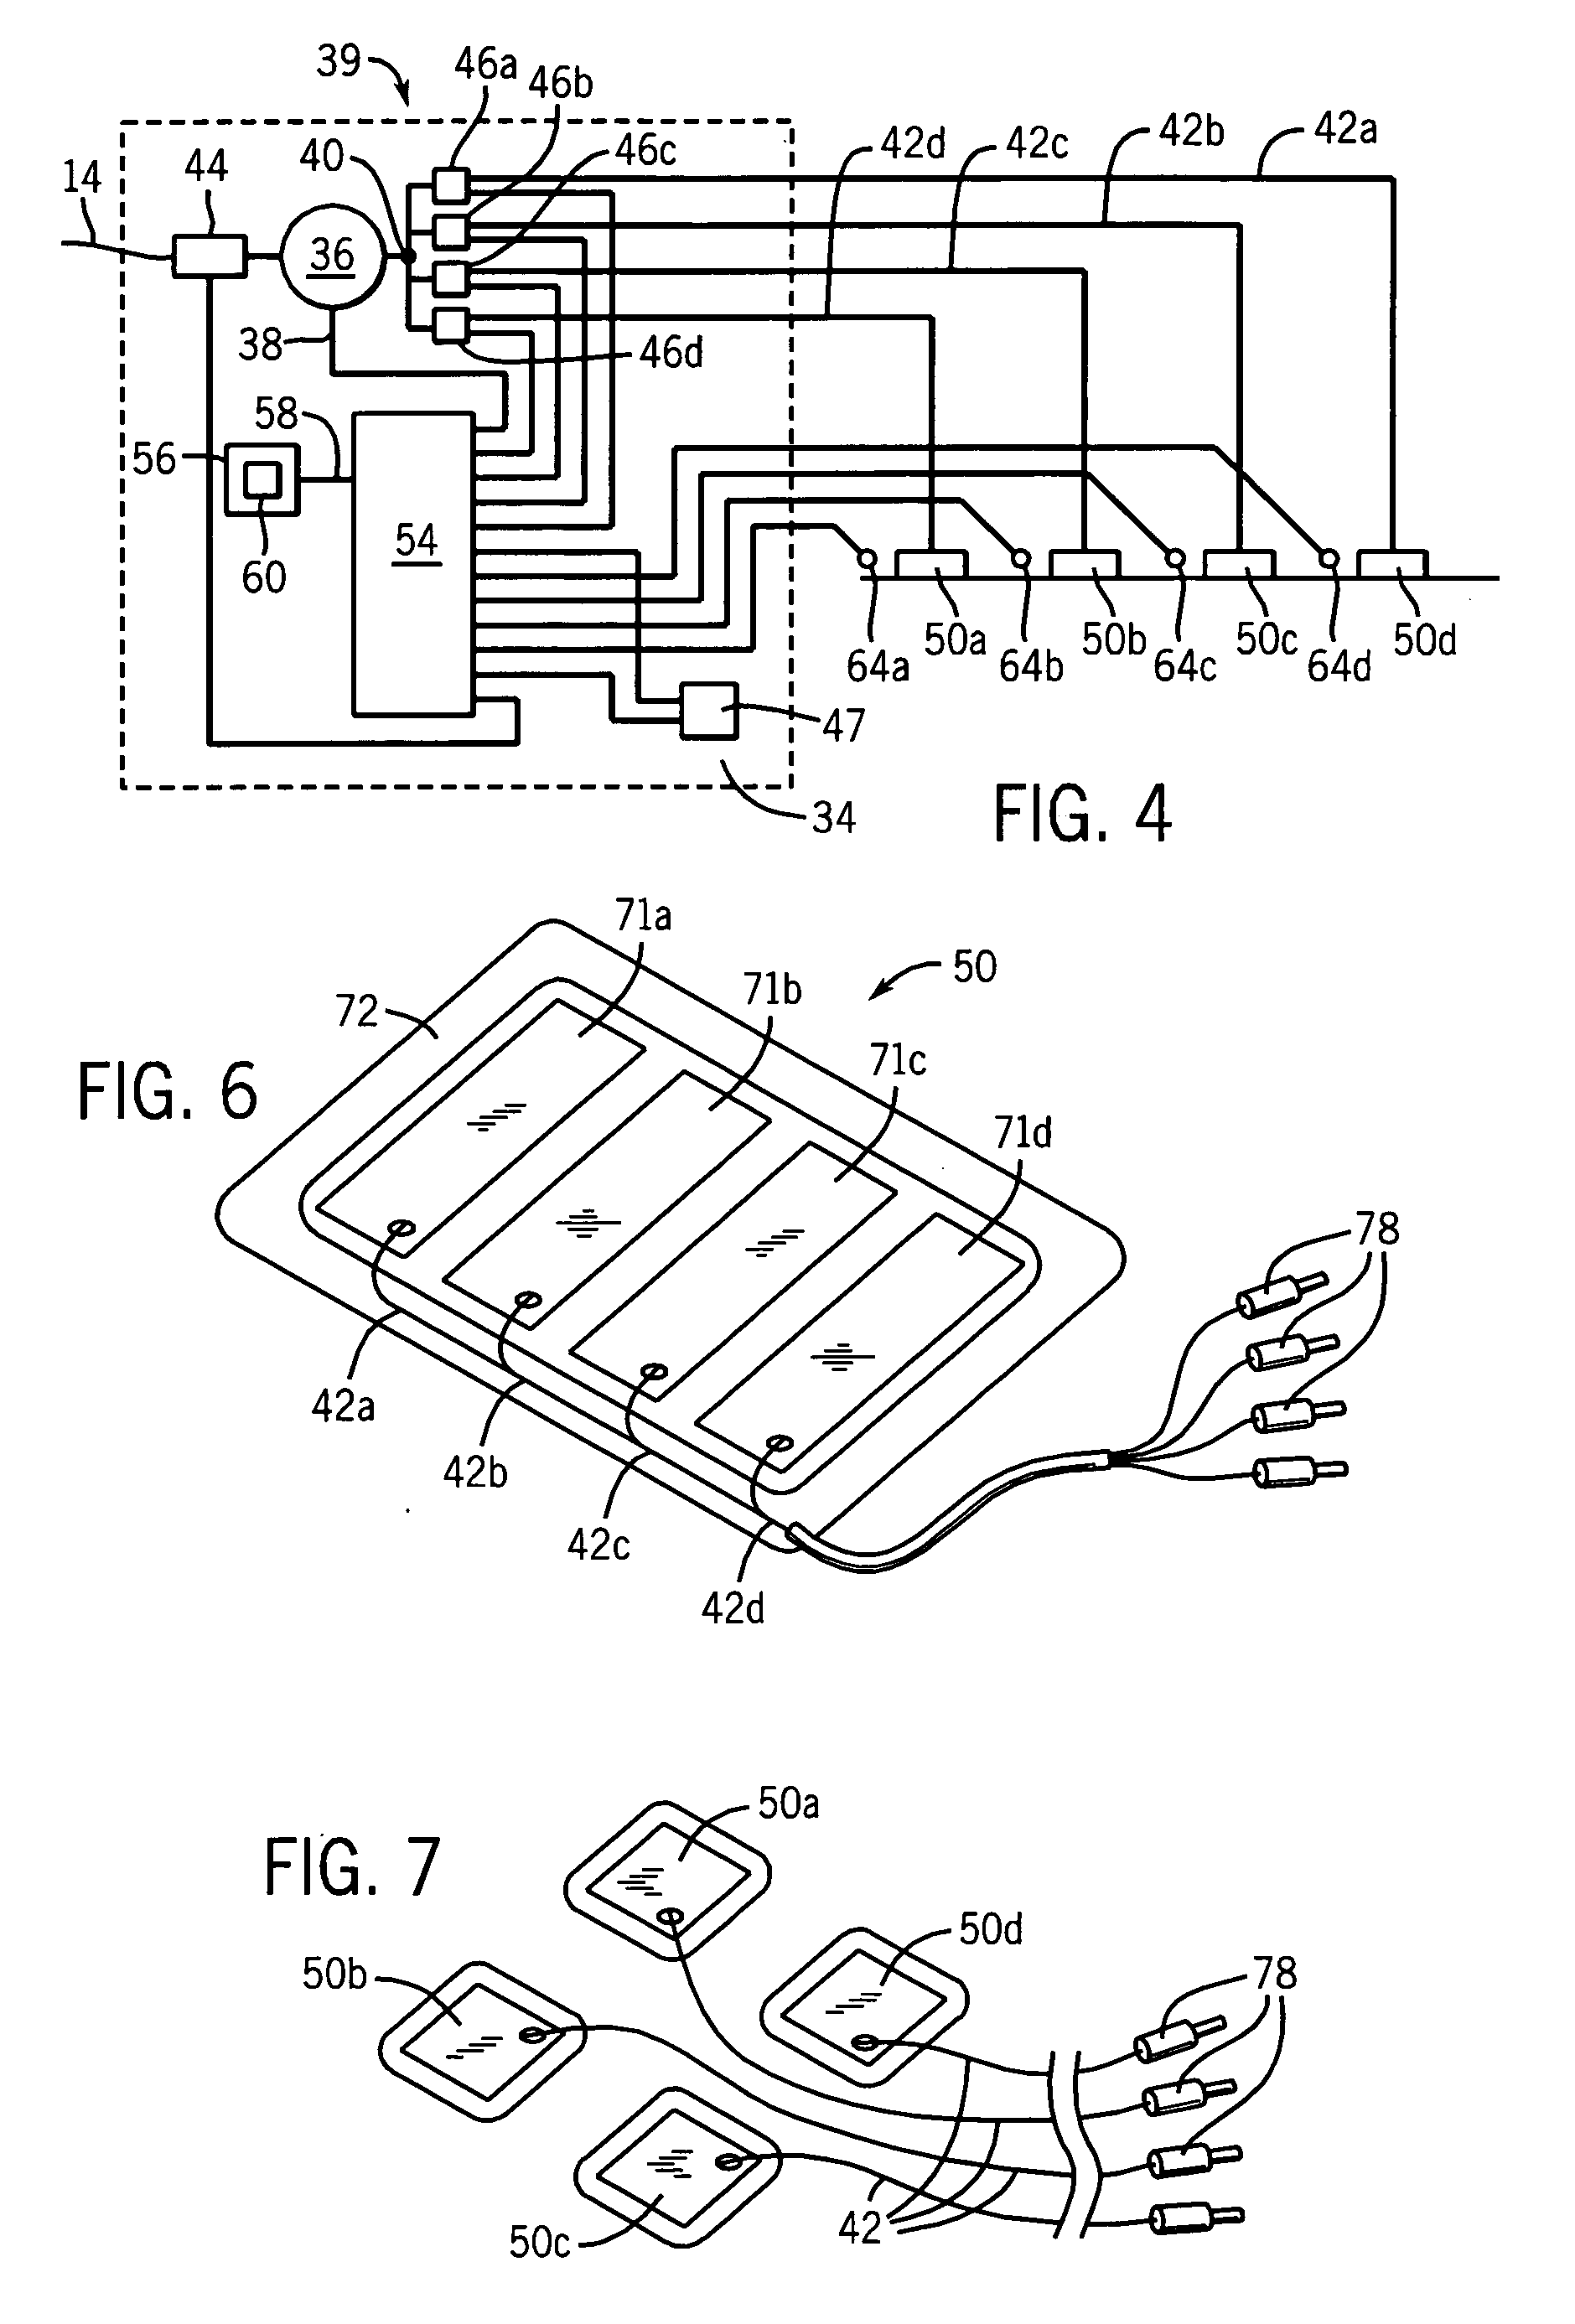 Radiofrequency ablation with independently controllable ground pad conductors